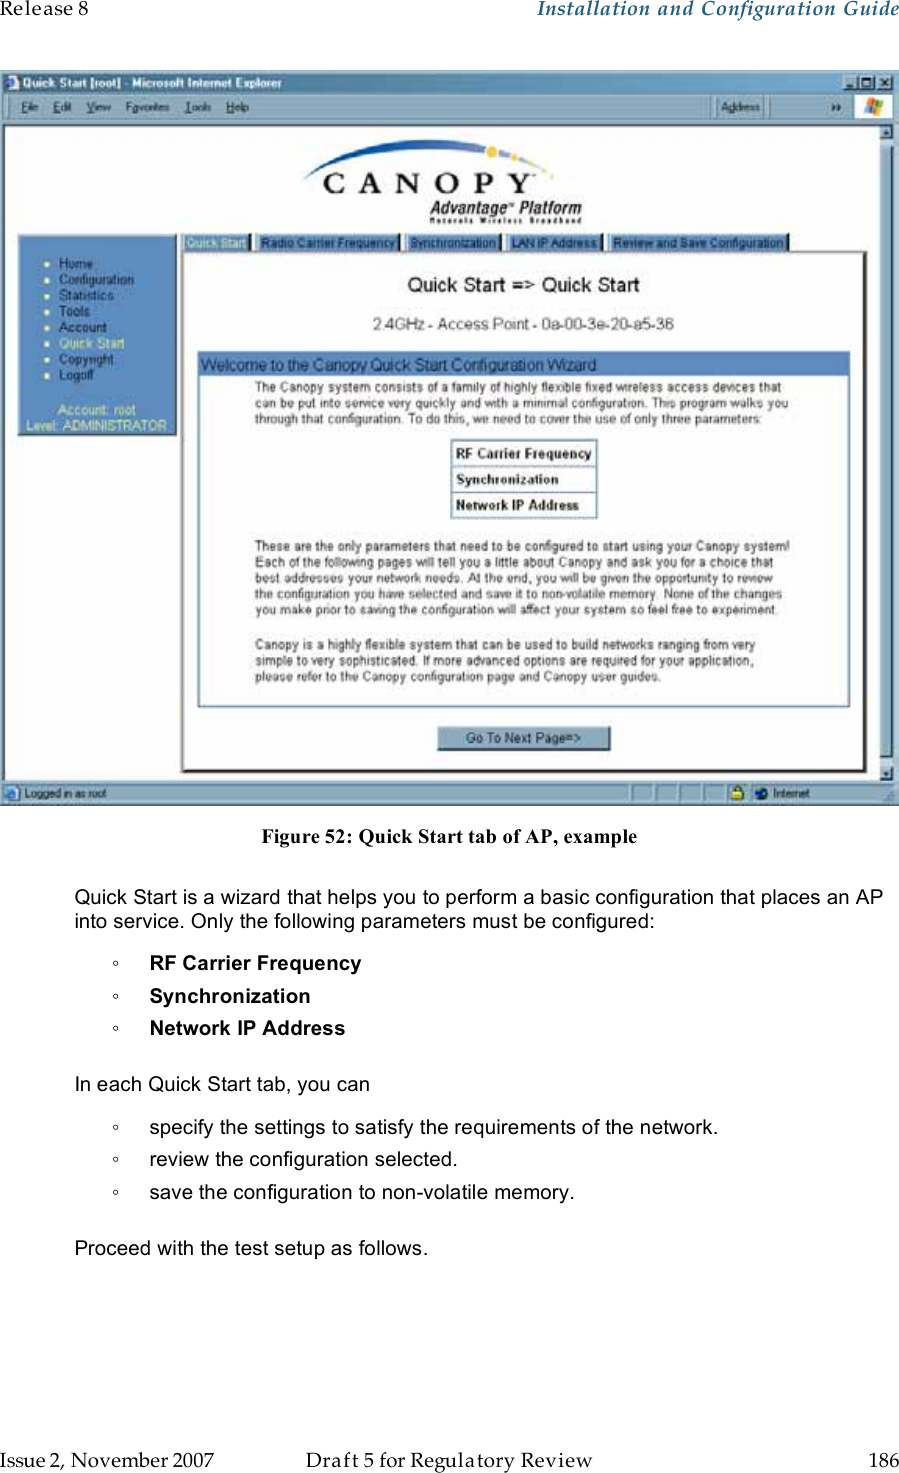 Release 8    Installation and Configuration Guide   Issue 2, November 2007  Draft 5 for Regulatory Review  186      Figure 52: Quick Start tab of AP, example  Quick Start is a wizard that helps you to perform a basic configuration that places an AP into service. Only the following parameters must be configured: ◦ RF Carrier Frequency ◦ Synchronization ◦ Network IP Address  In each Quick Start tab, you can ◦  specify the settings to satisfy the requirements of the network. ◦  review the configuration selected. ◦  save the configuration to non-volatile memory.  Proceed with the test setup as follows. 